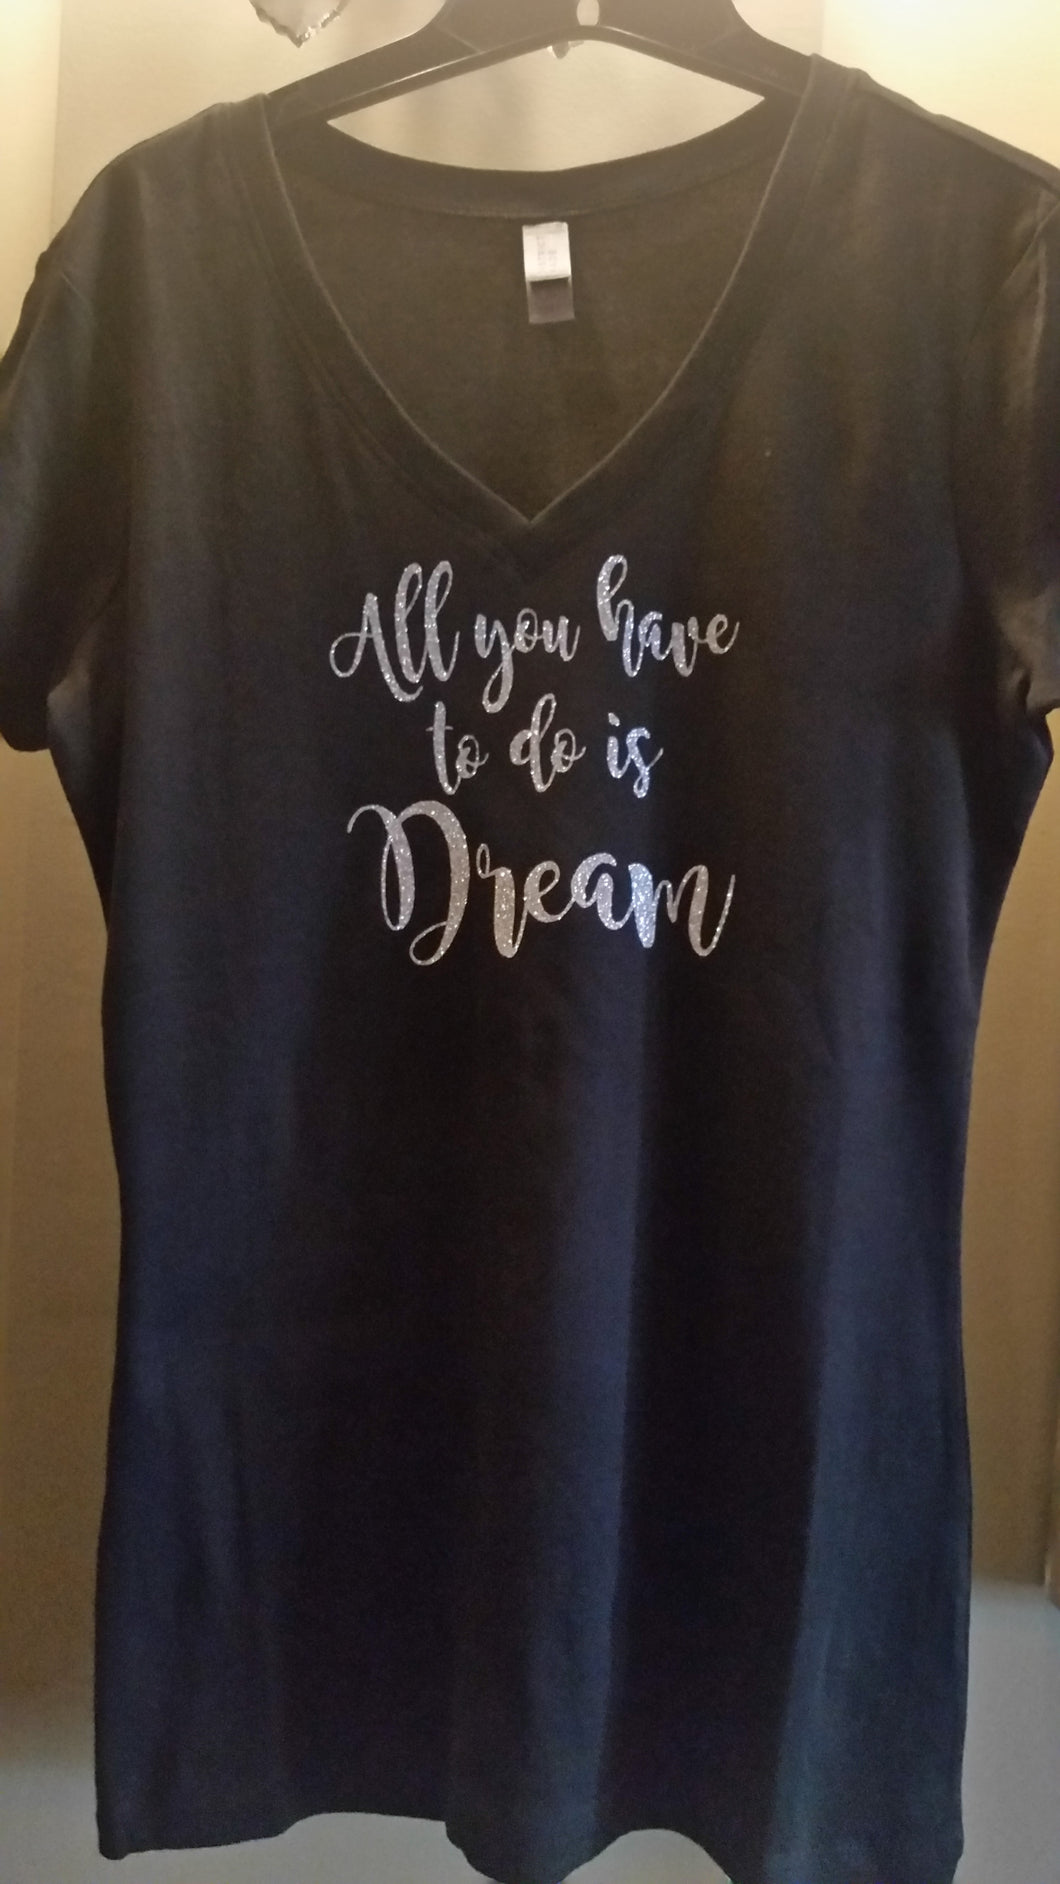 All you have to do is dream Ladies Shirt